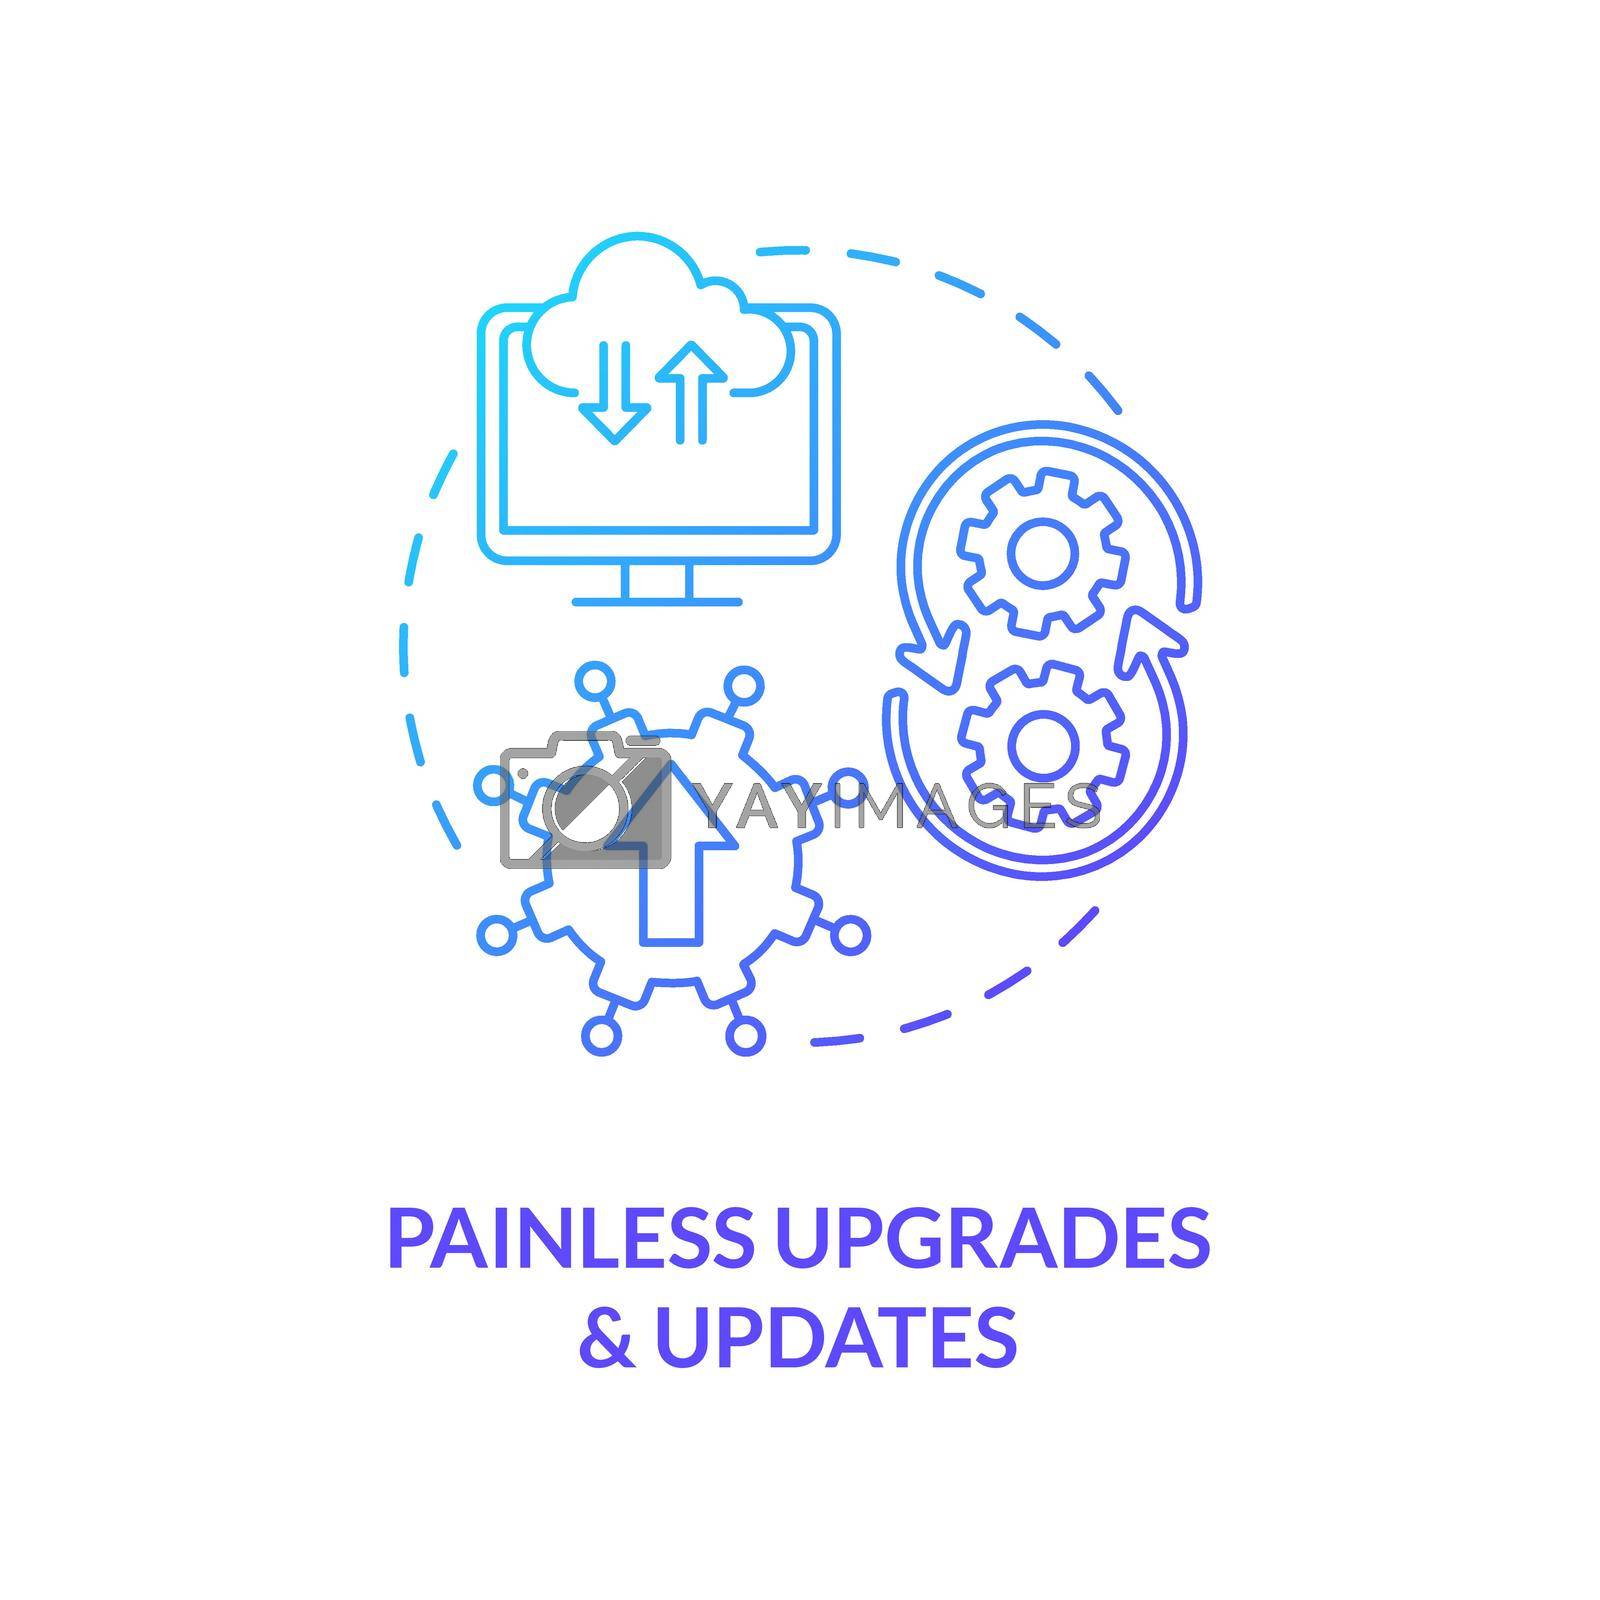 Royalty free image of Painless upgrades and updates concept icon by bsd